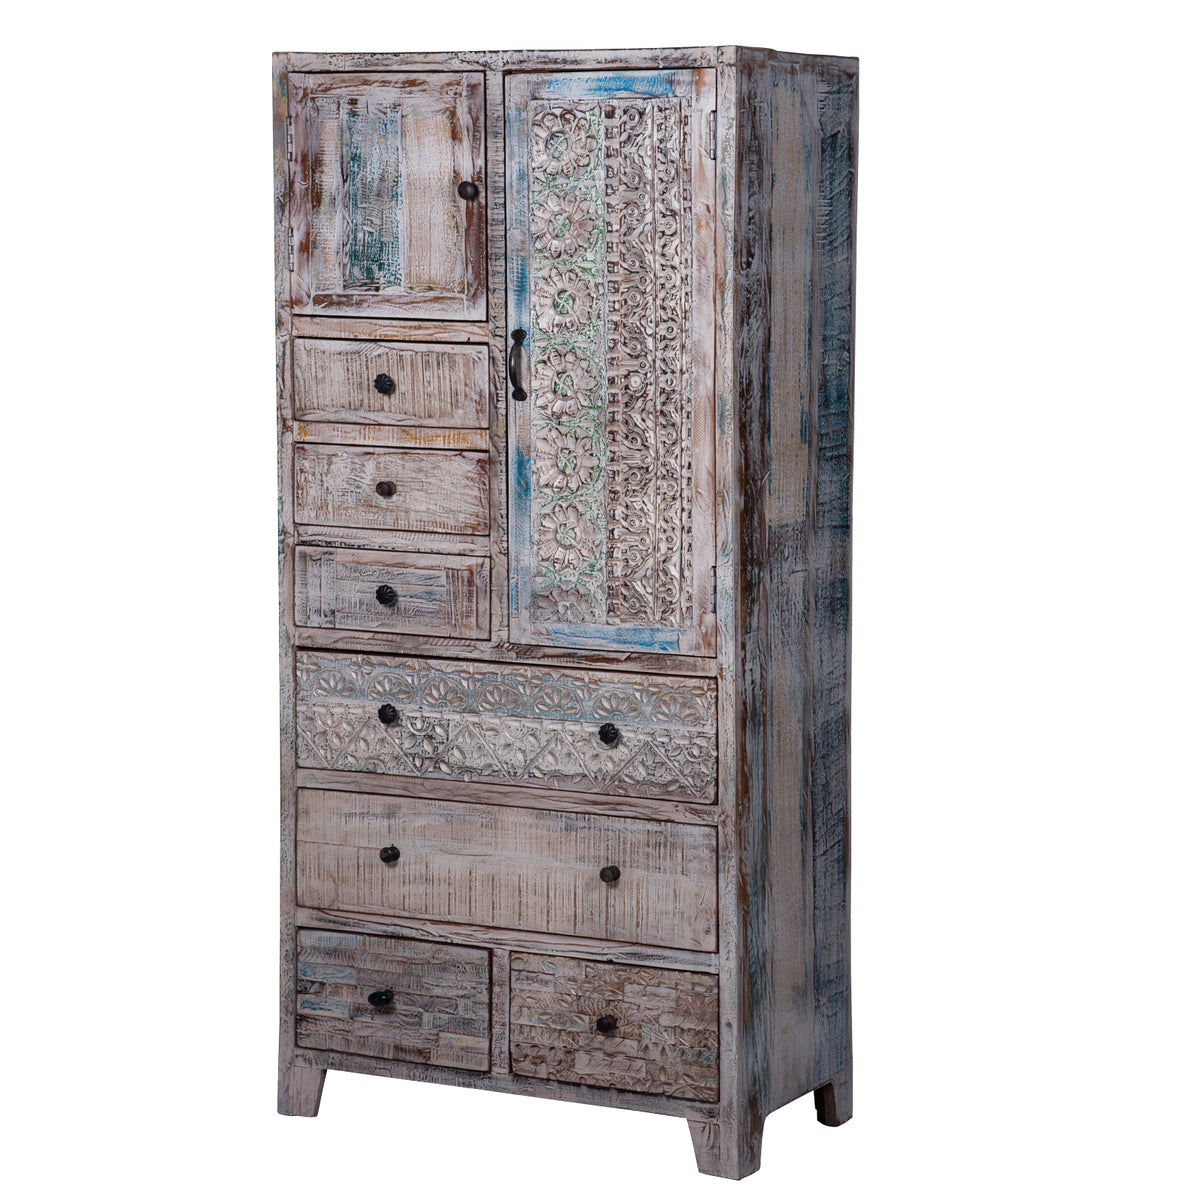 armoire in distressed white color